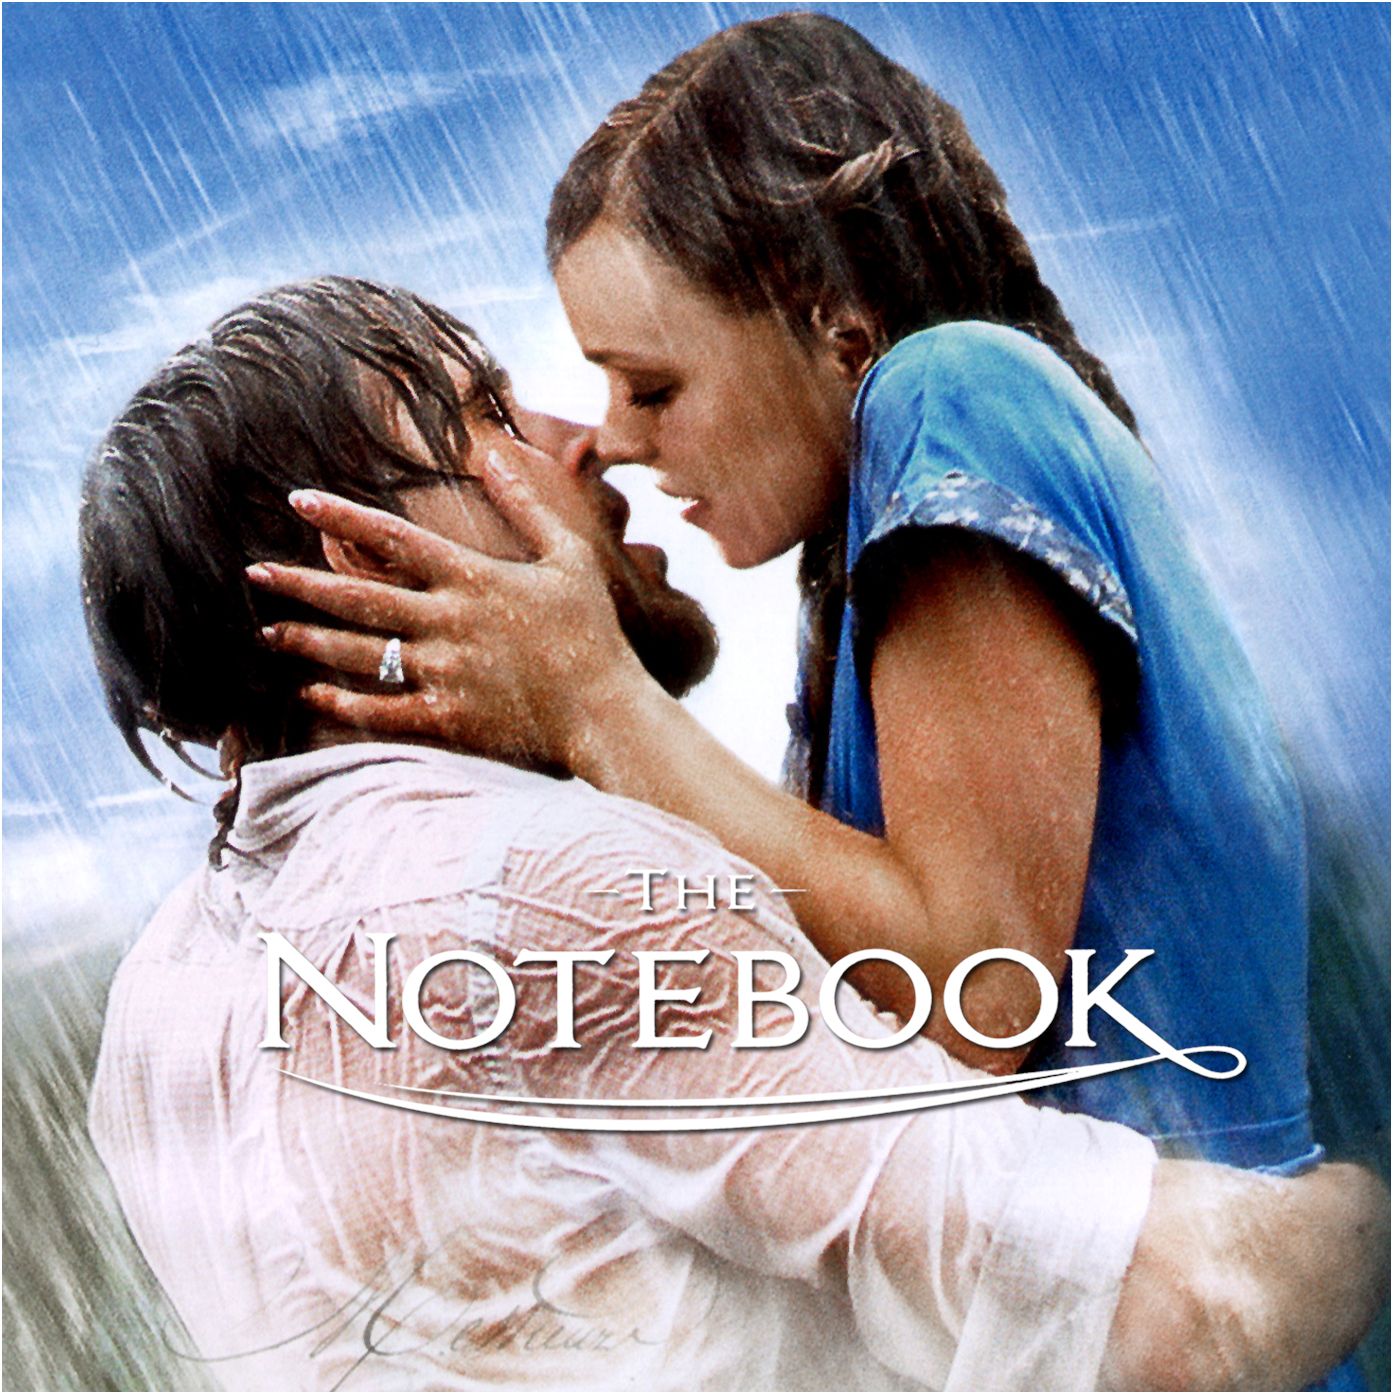 21 Facts You Never Knew About "The Notebook"